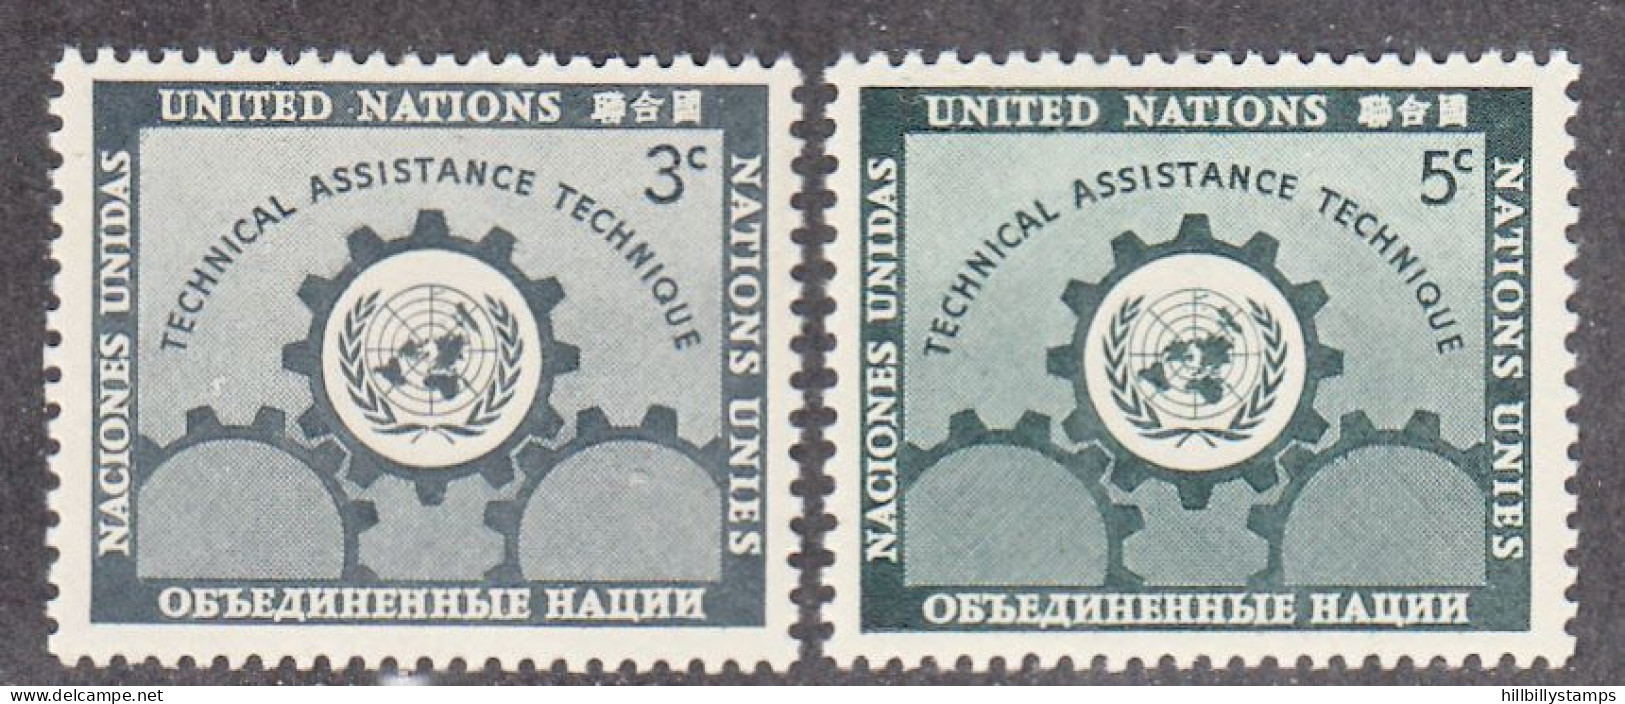 UNITED NATIONS NY   SCOTT NO 19-20   MNH     YEAR  1953 - Unused Stamps